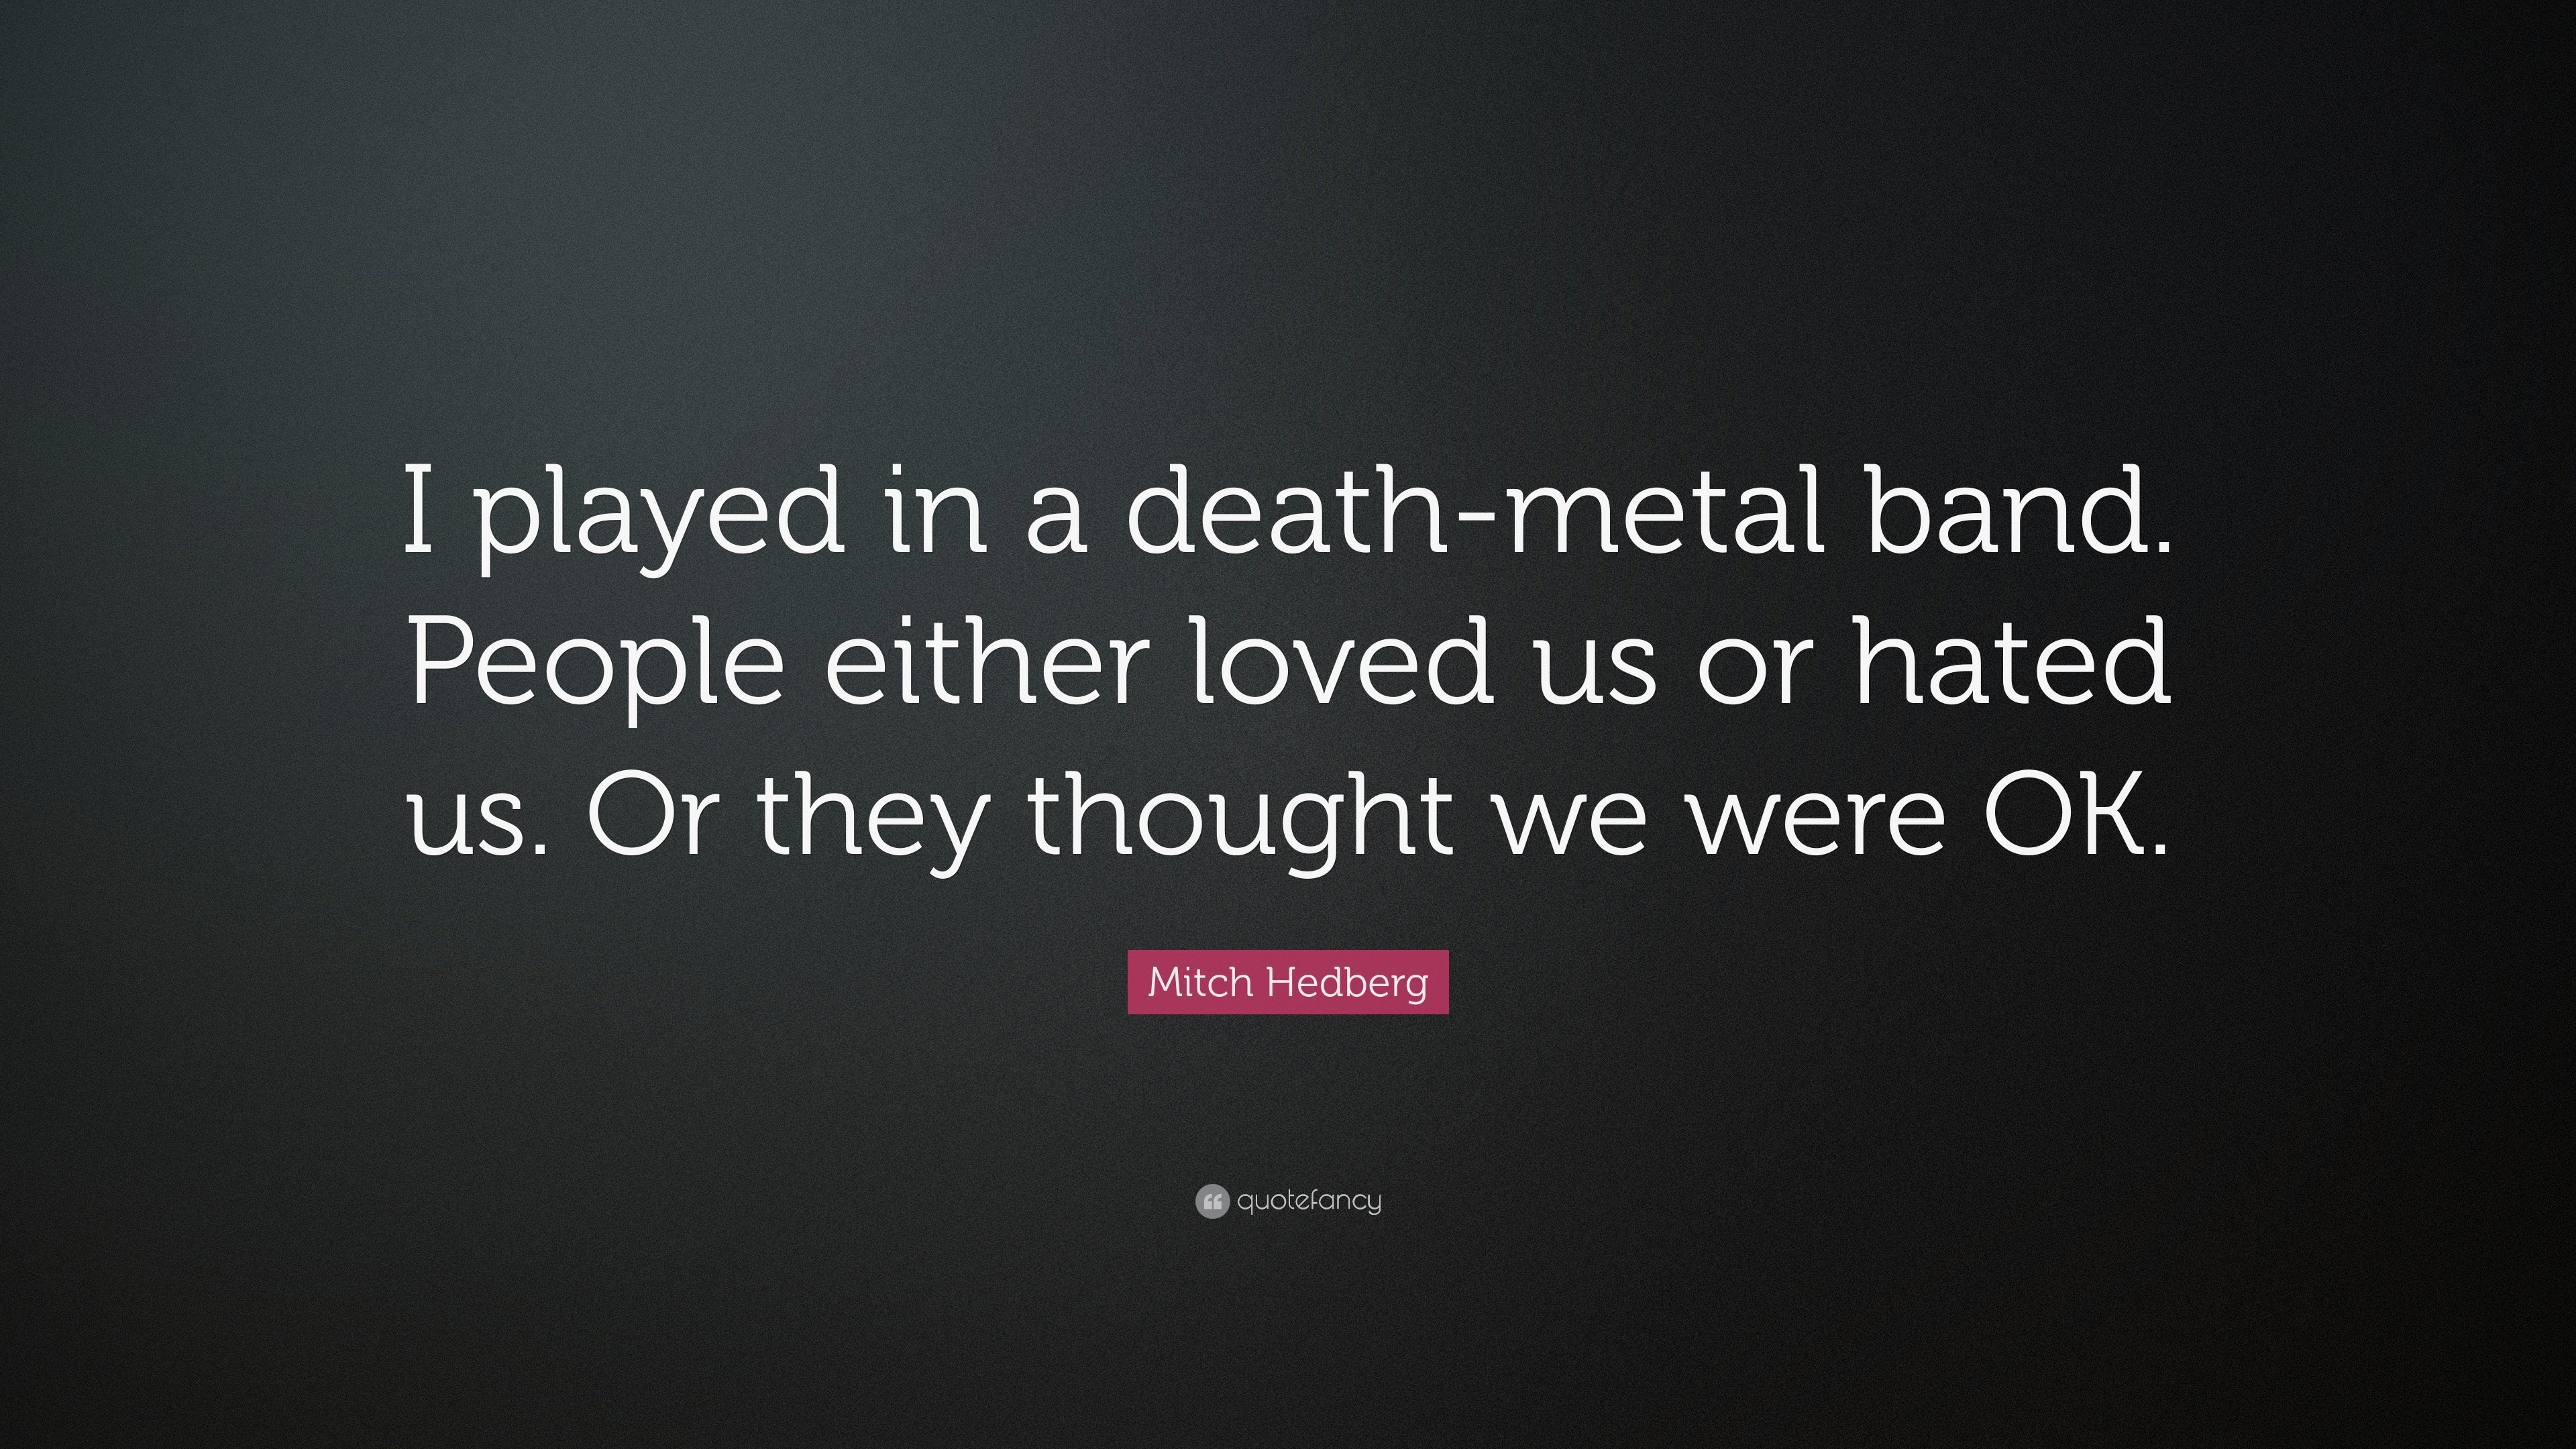 3840x2160 Mitch Hedberg Quote: “I played in a death-metal band. People either